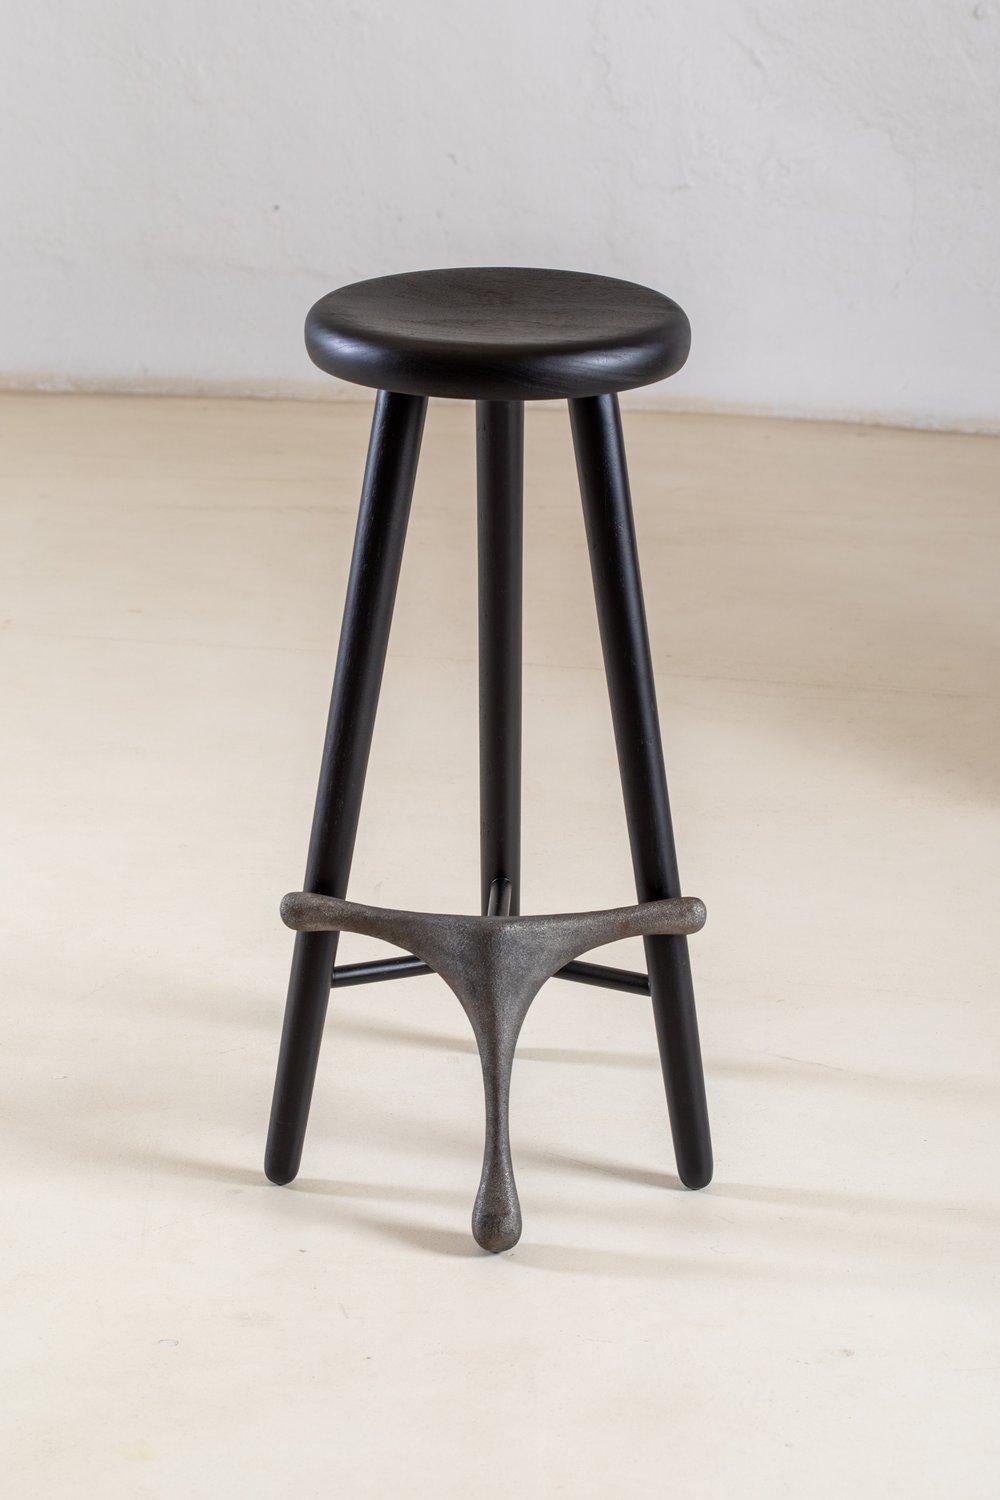 Amparo Jequitibá and Iron Tall Stool by Alva Design
Materials: blackened solid wood (Jequitibá) and iron.
Dimensions: W 37 x D 48 x H 73 cm.

Available in different wood options (Braúna or Freijó solid wood) and footrest options (solid wood,